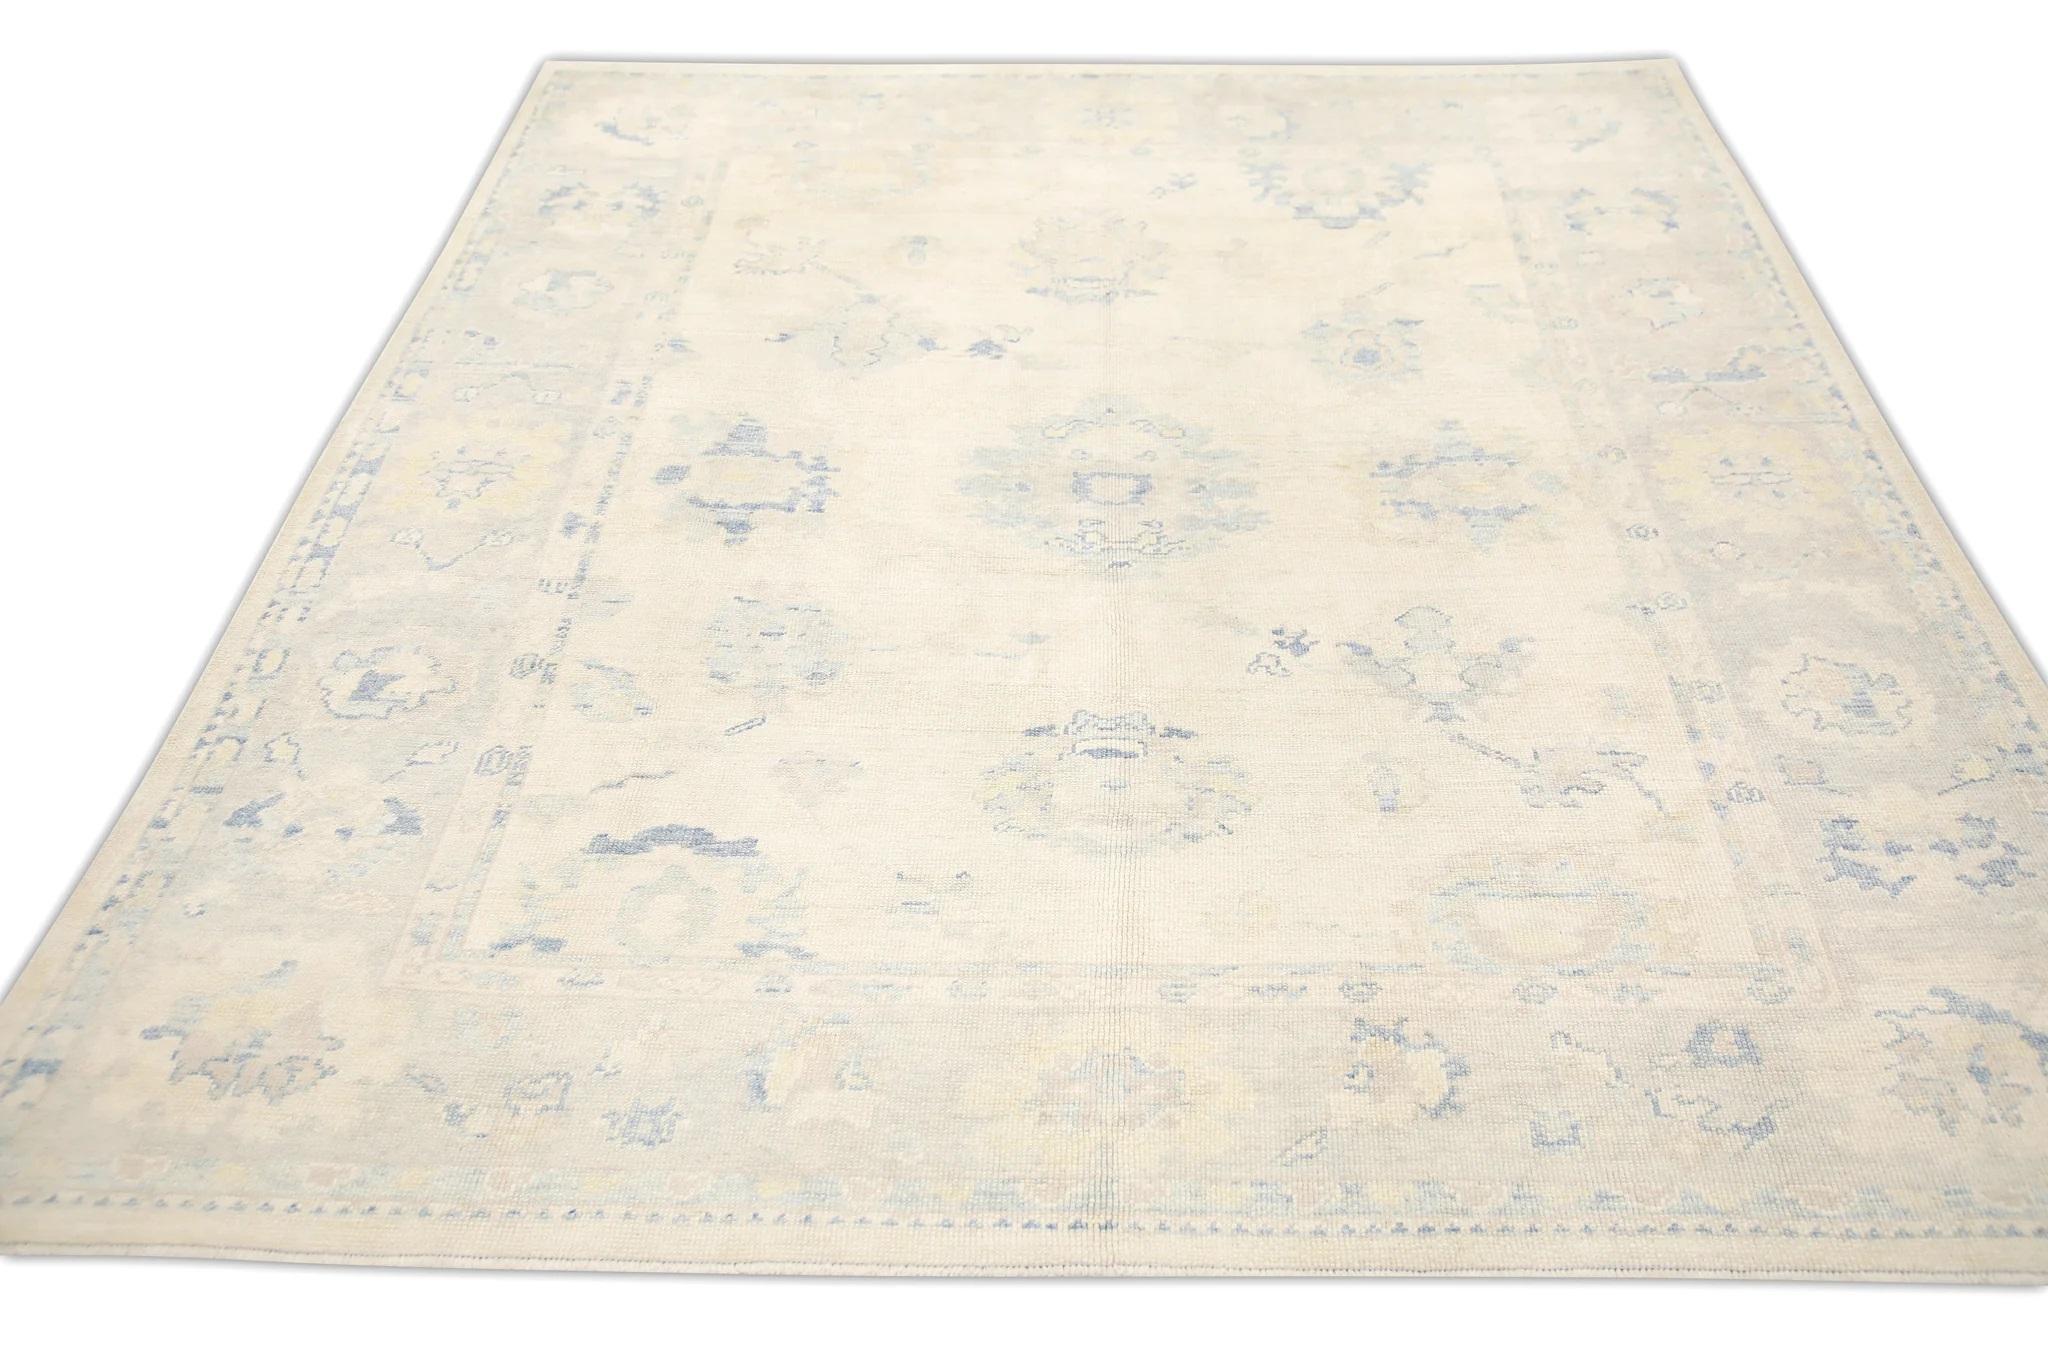 Contemporary Cream Handwoven Wool Turkish Oushak Rug in Blue & Pink Floral Design 8' x 9'8